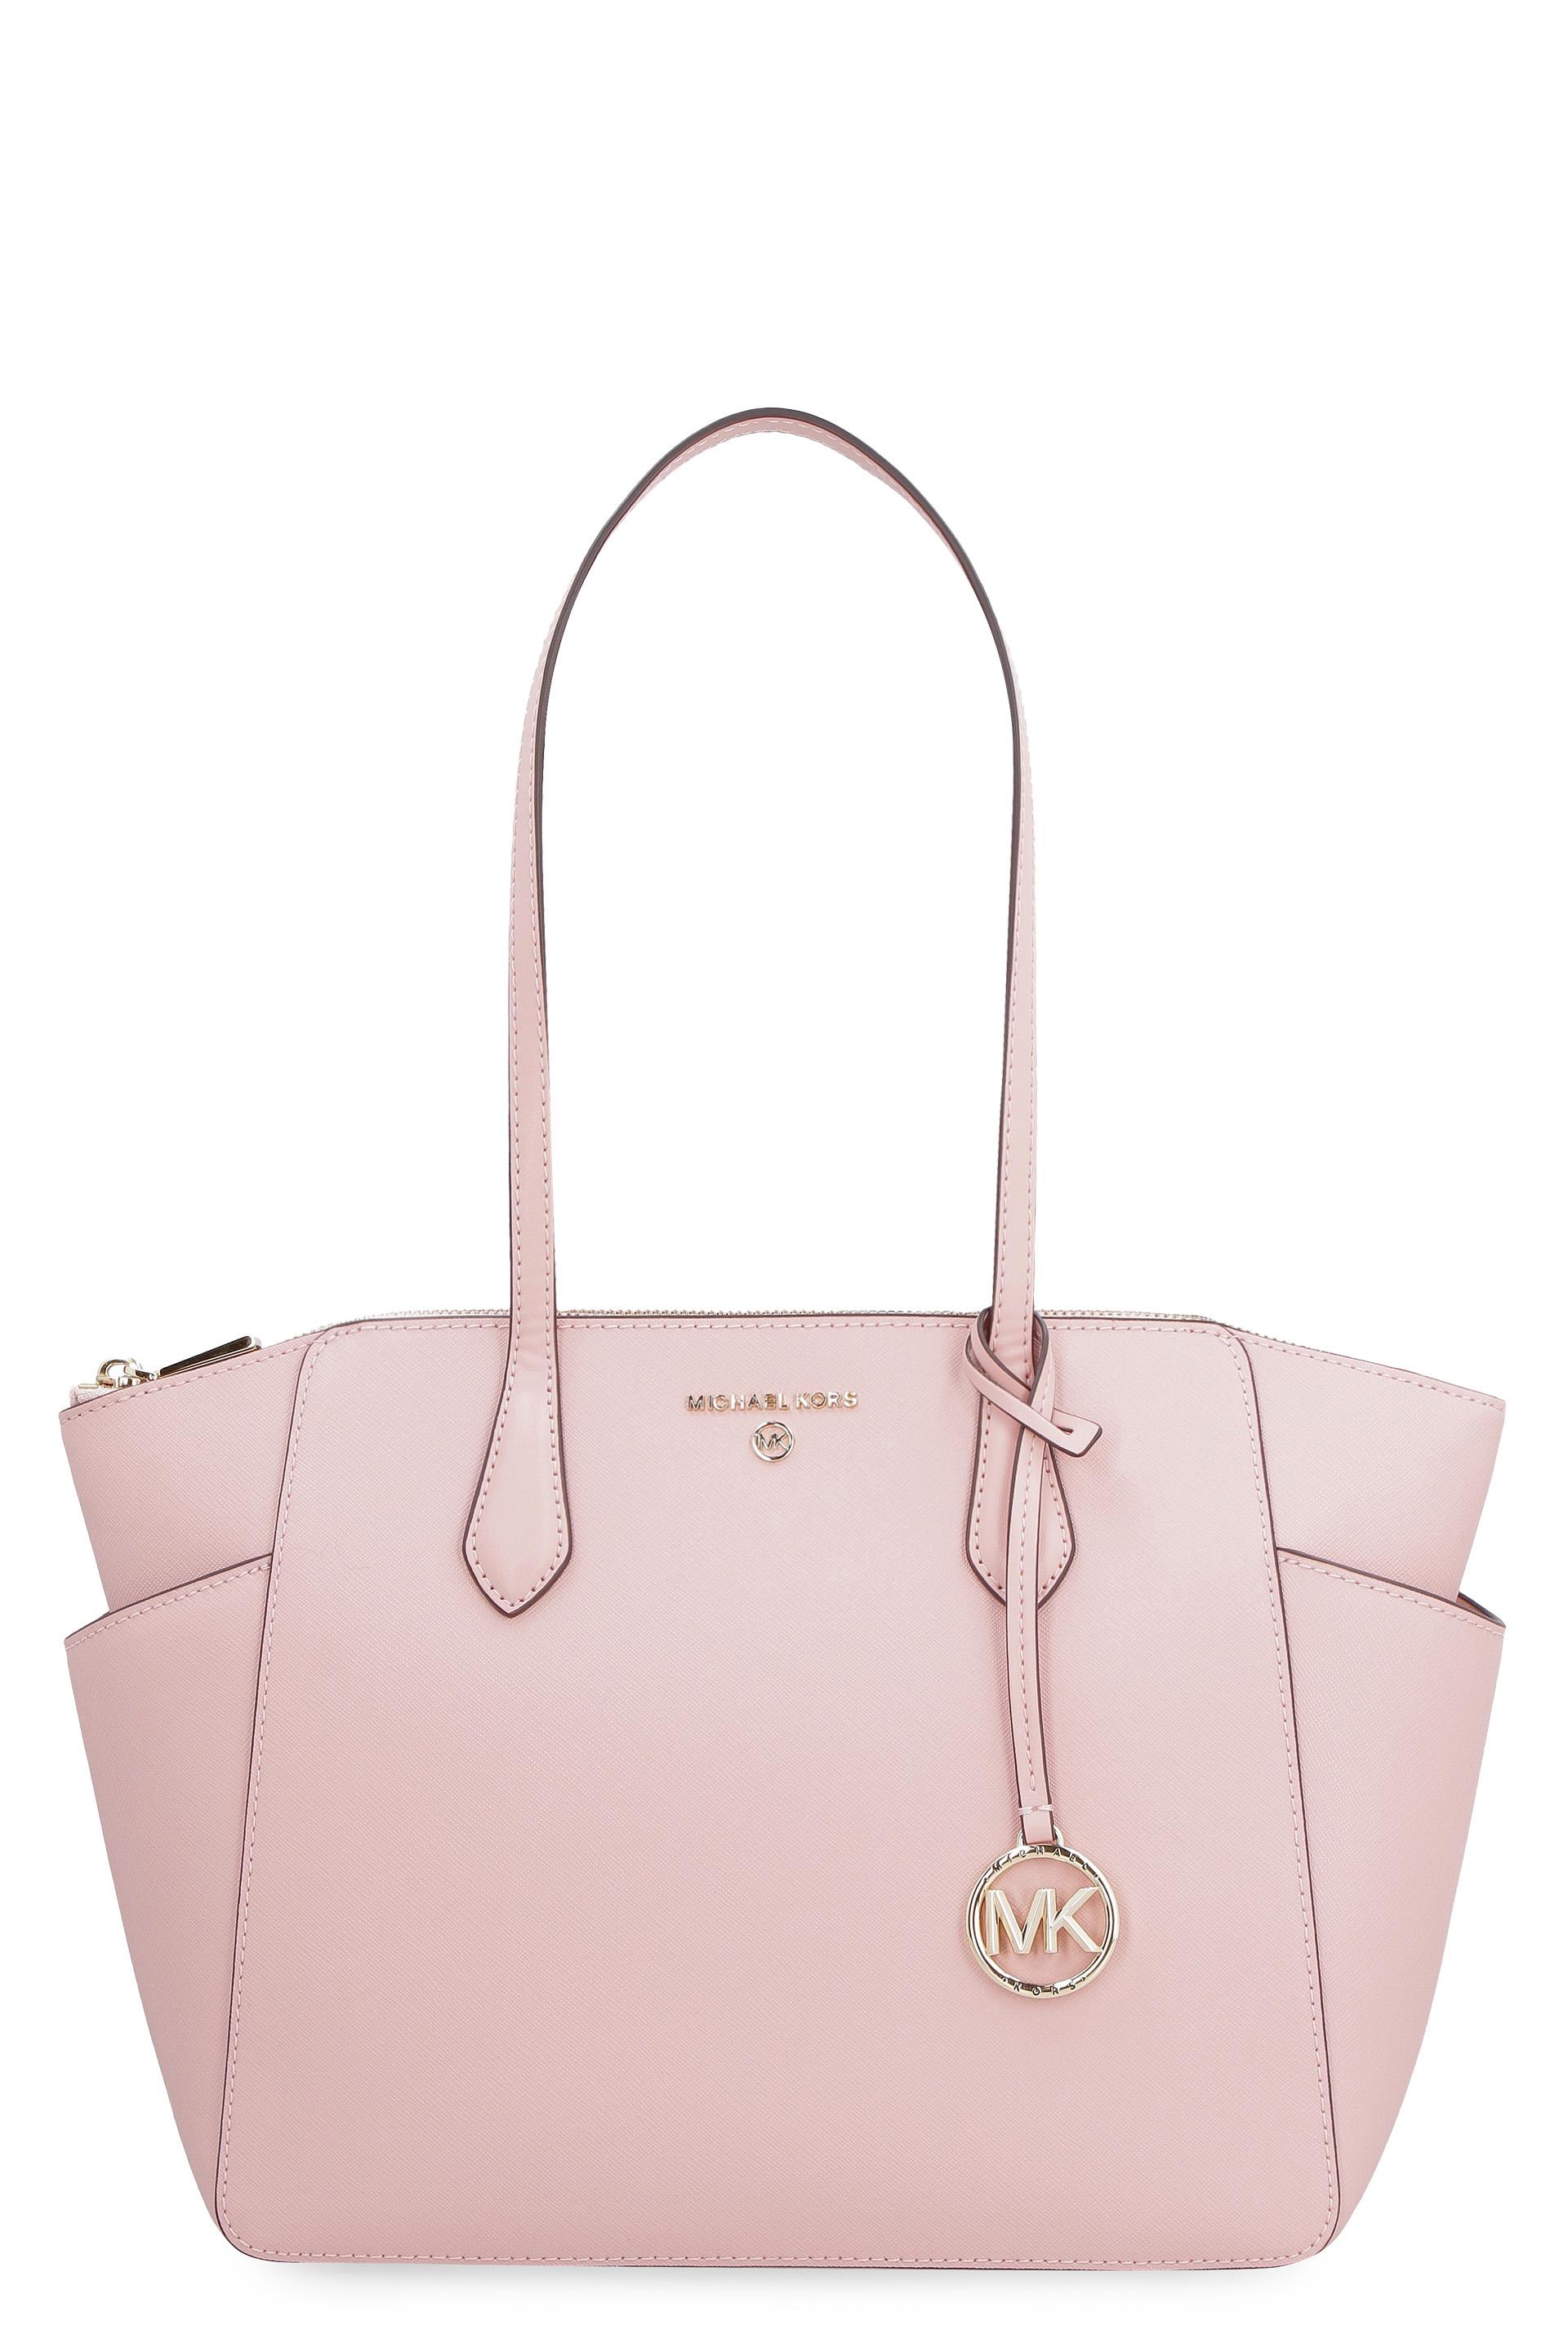 MICHAEL KORS: Michael Marilyn bag in saffiano leather - Pink